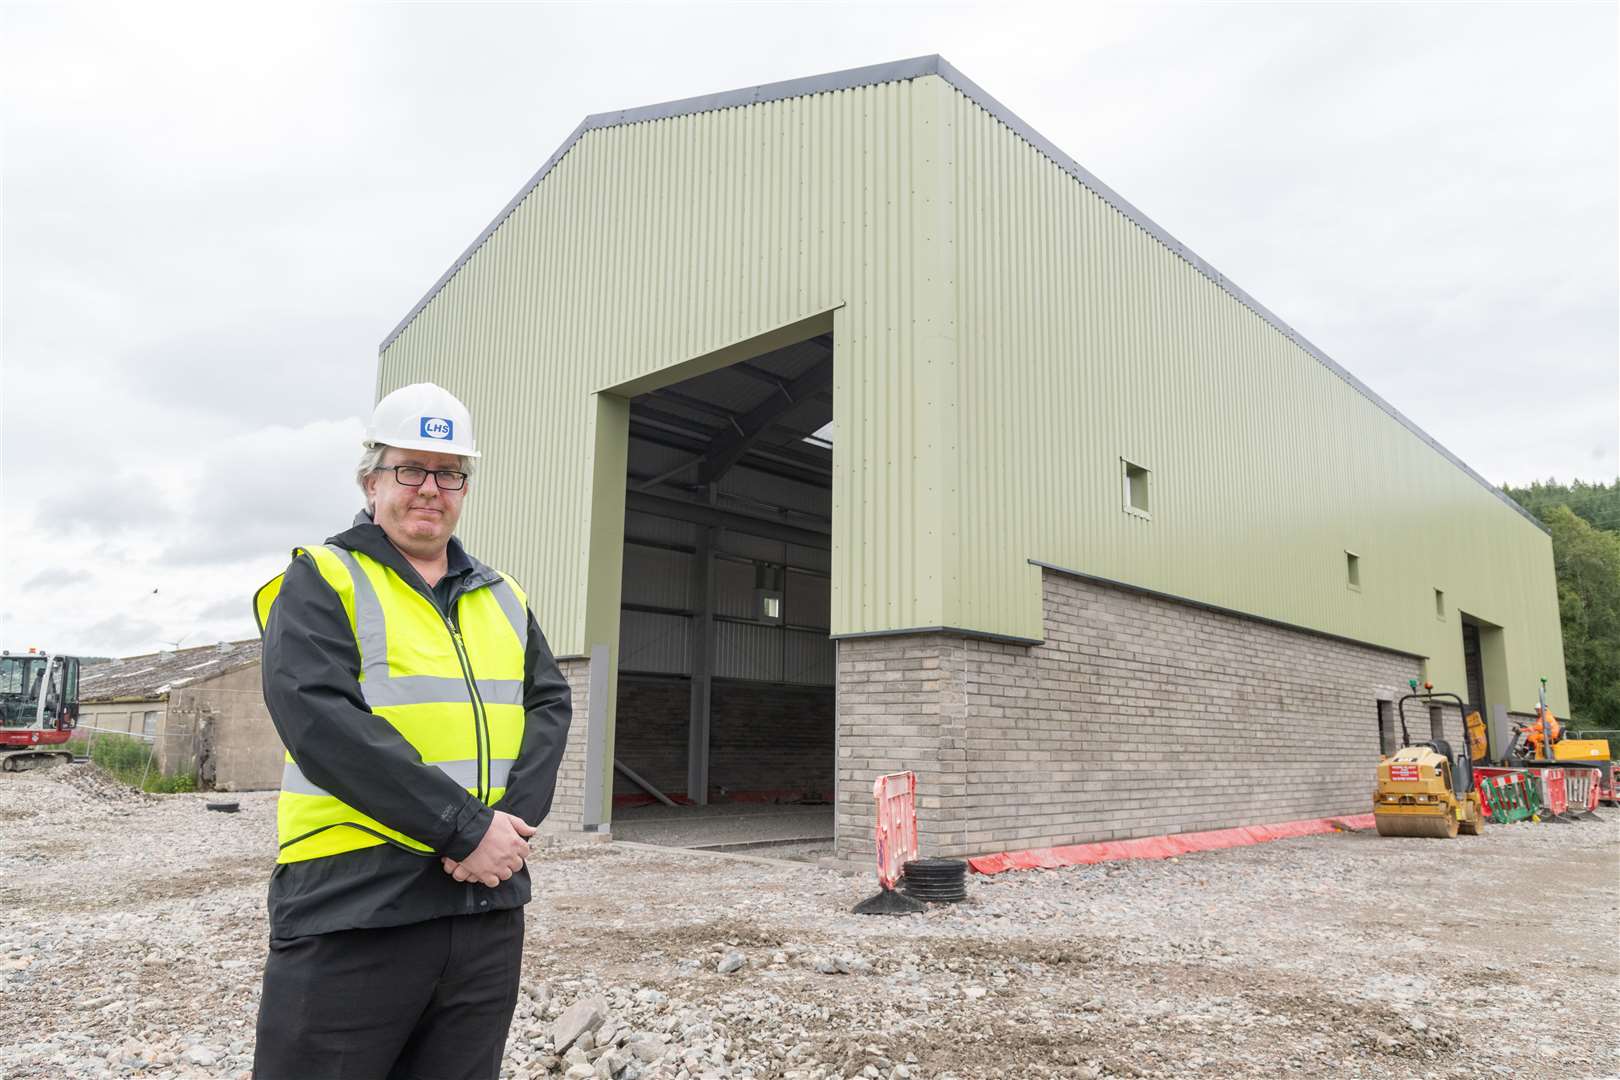 Garry Fraser, co-owner of LH Stainless Ltd in Keith, at their new site which will be finished in September. Picture: Beth Taylor